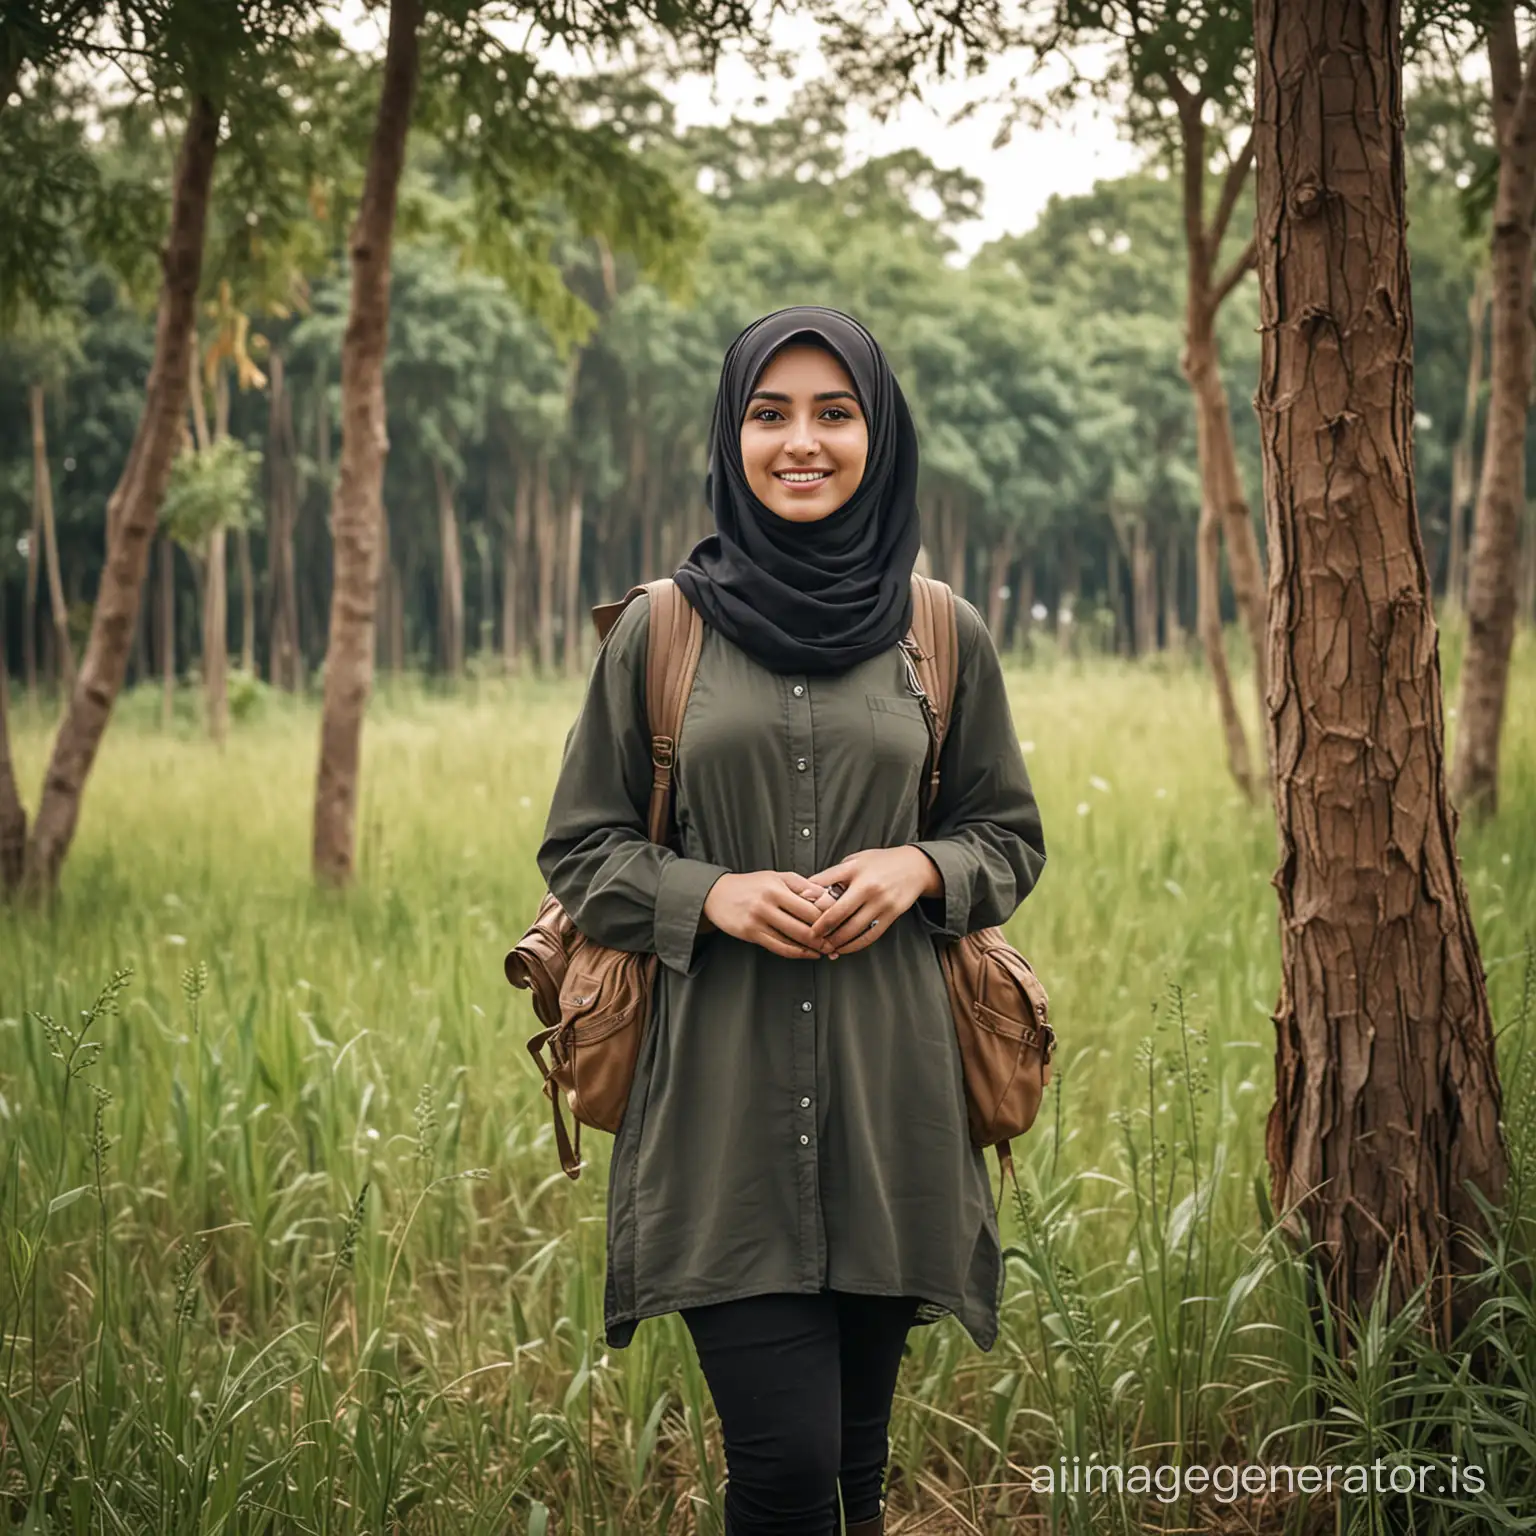 Arab women beautiful Asia hijab standing in a field with a backpack and trees, standing in the savannah, in front of a forest background, in a scenic background, standing in grassy field, tourism photography, standing in a grassy field, with a tall tree, young man with short, amidst nature, standing in tall grass, with a backpack, perfect portrait composition, travel photography, looking at viewer, faint smile